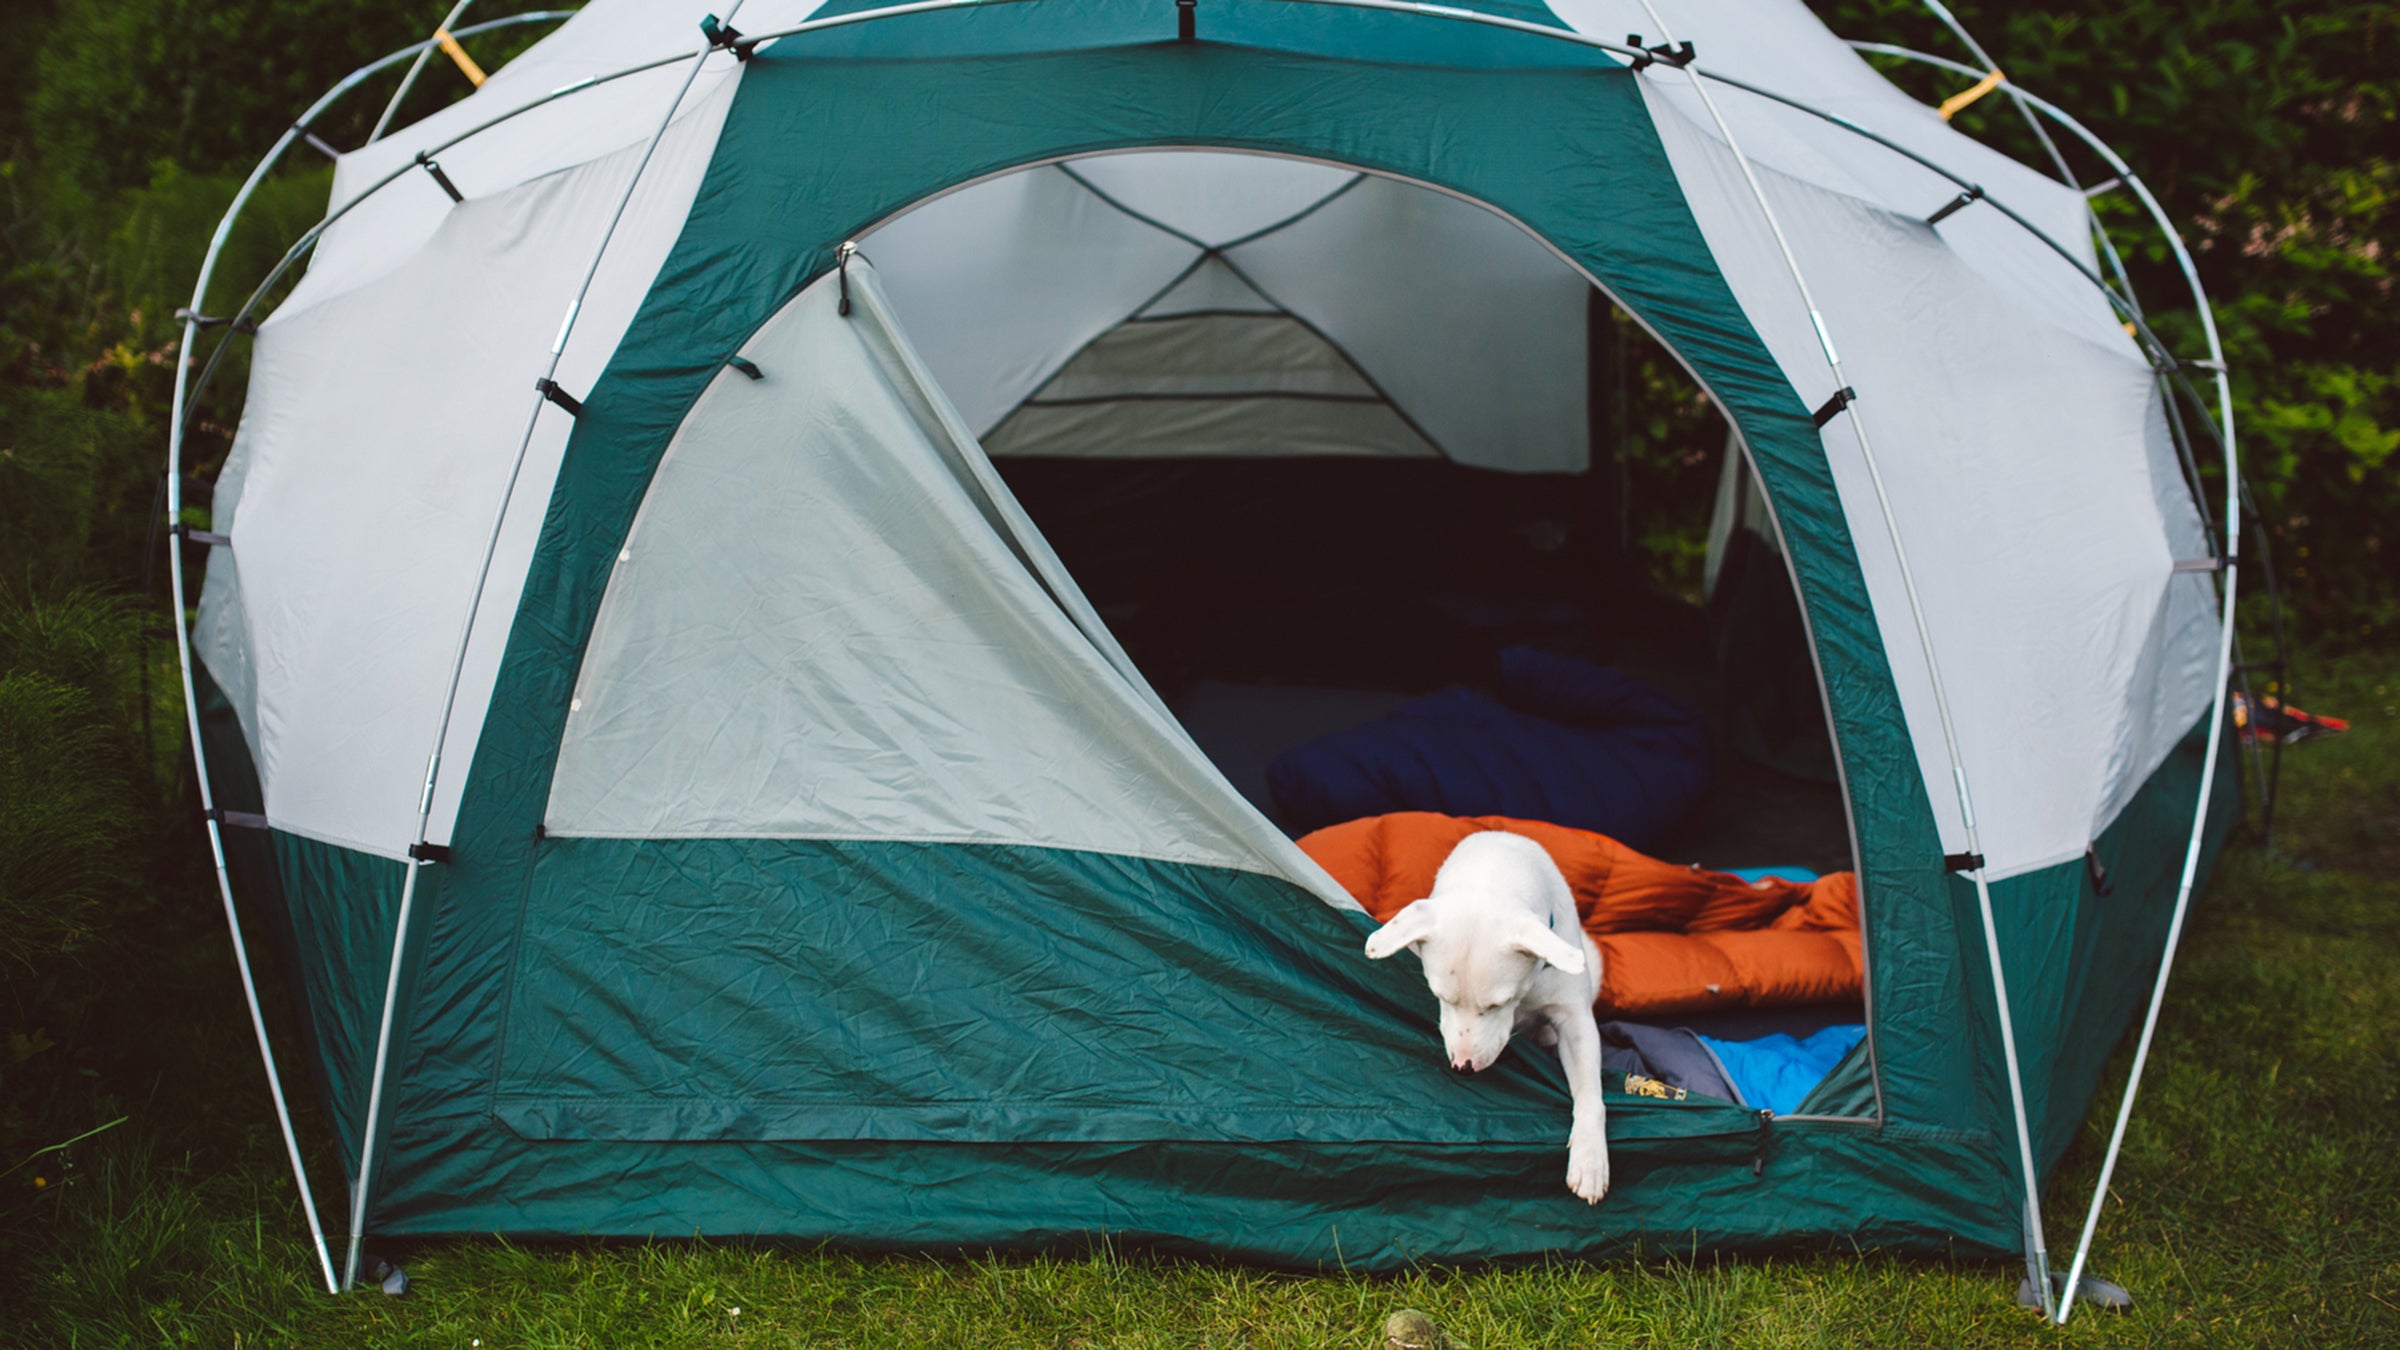 The best camping gadgets for your next trip with the family